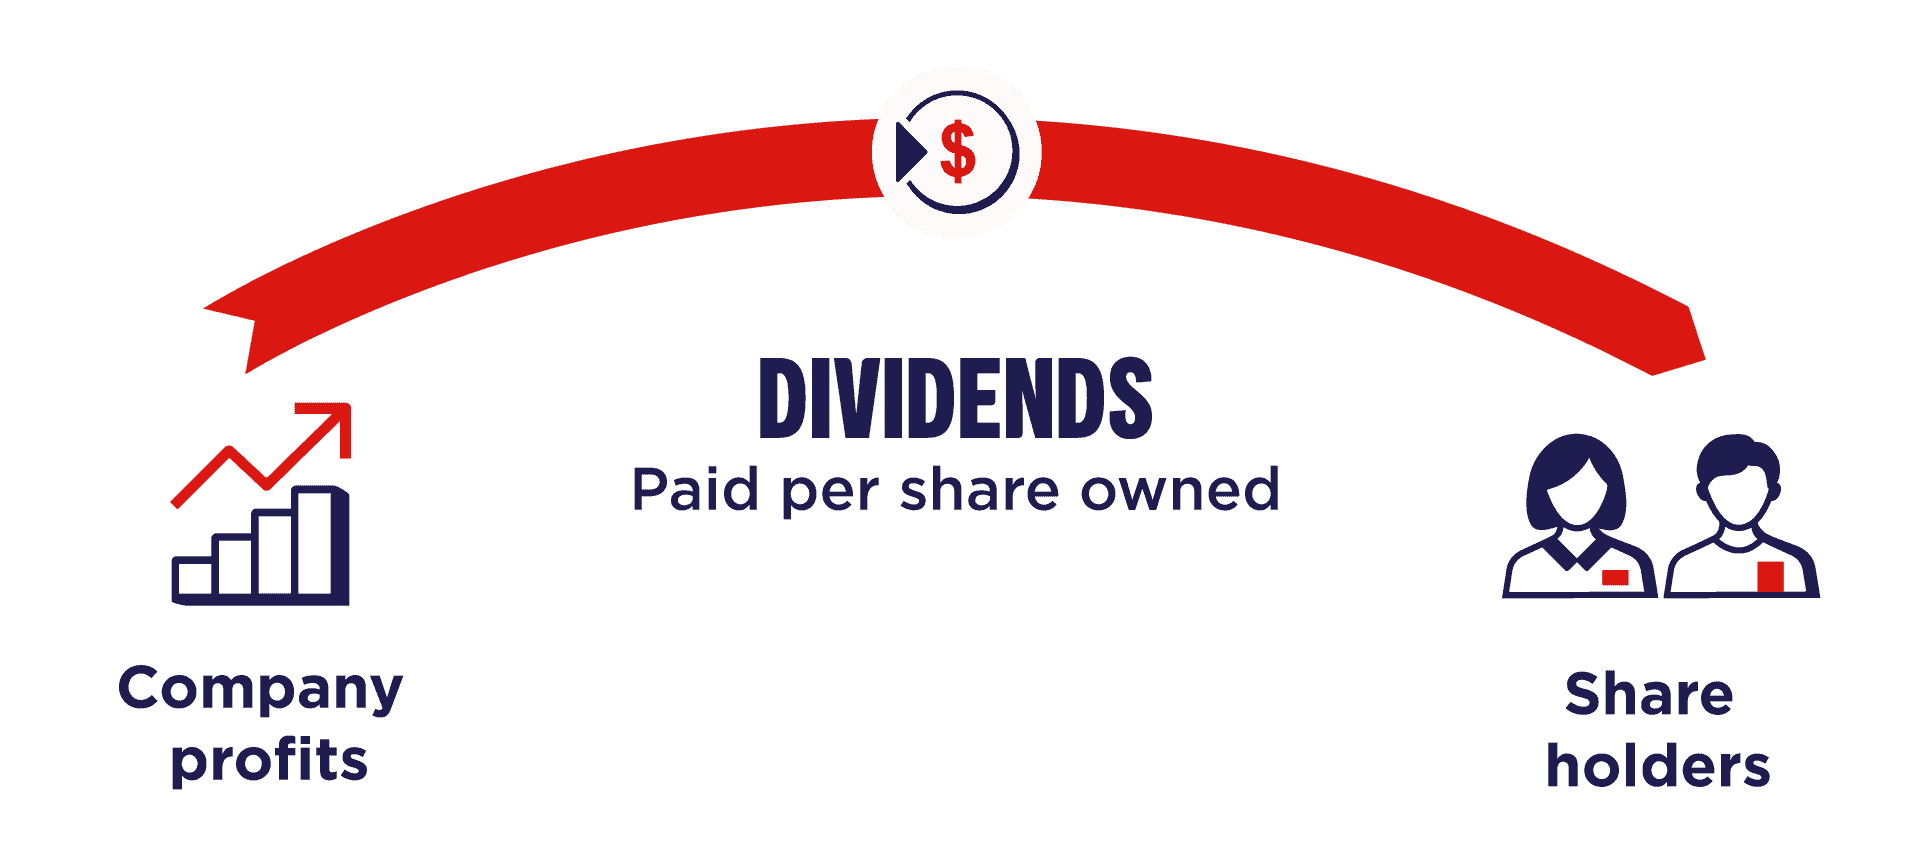 dividends and share holders